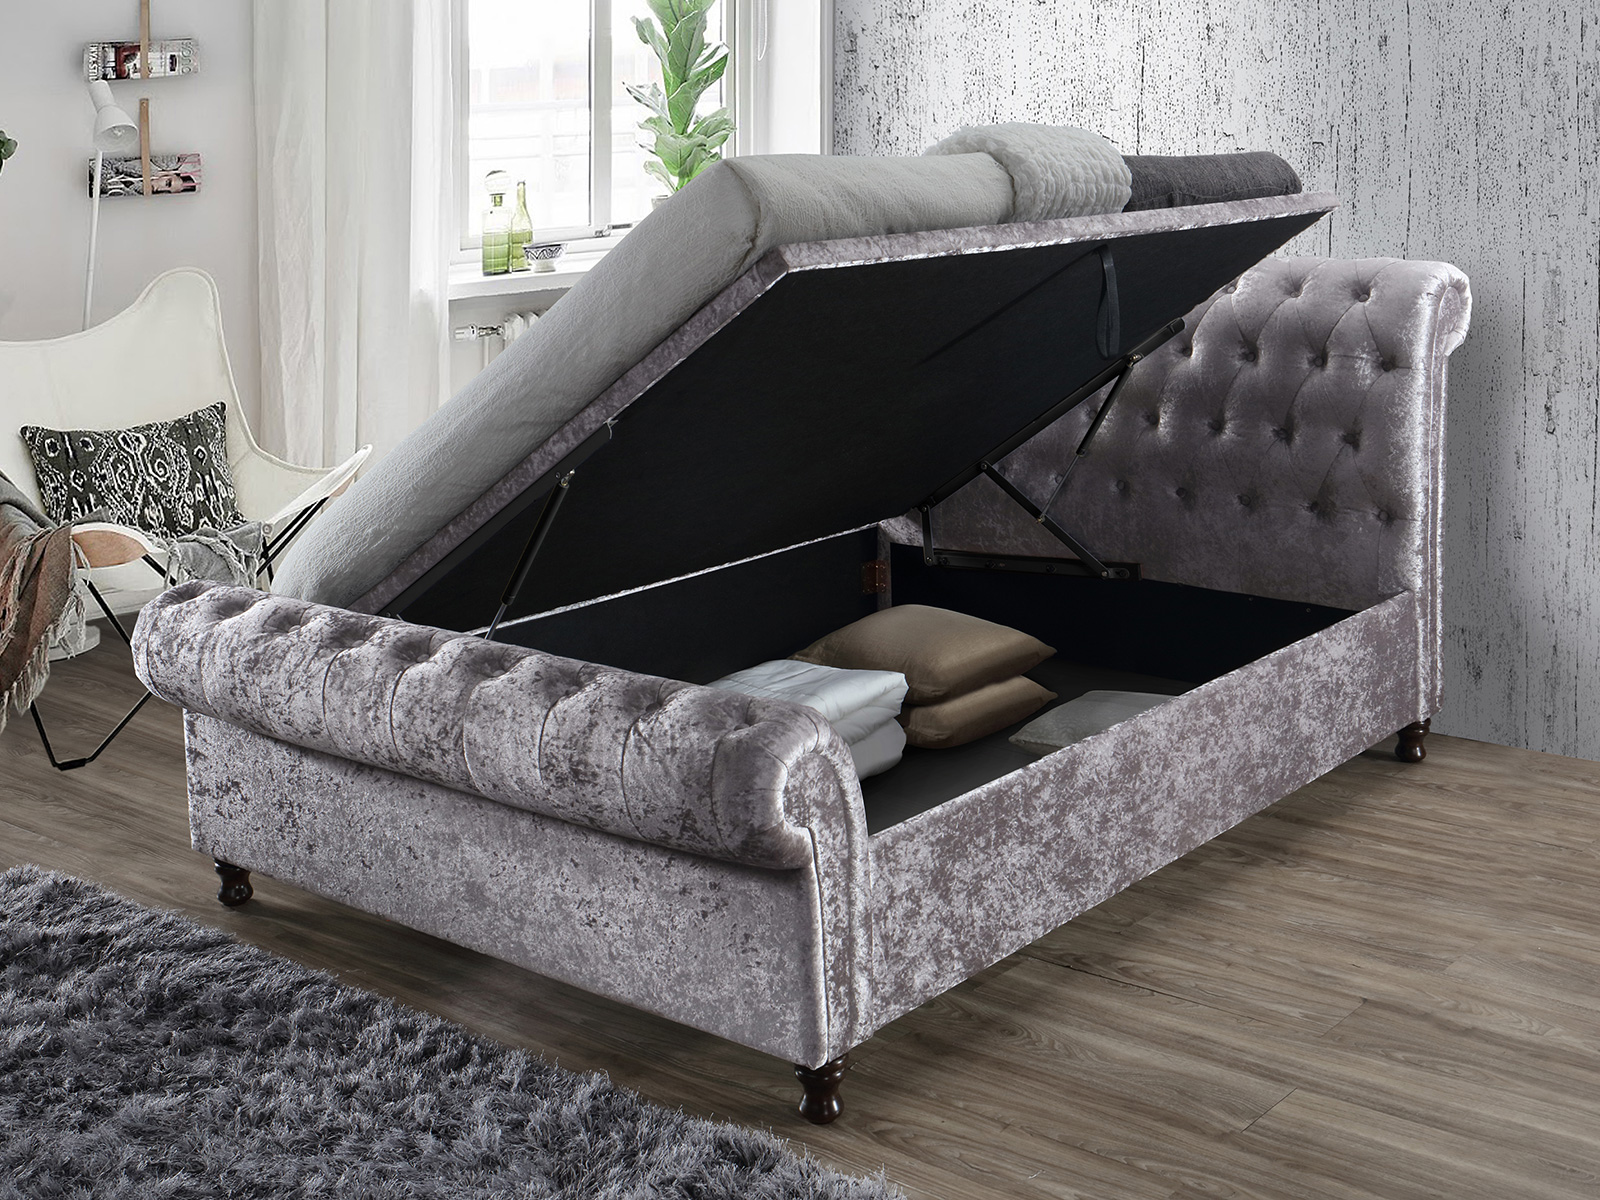 king size ottoman bed frame with mattress